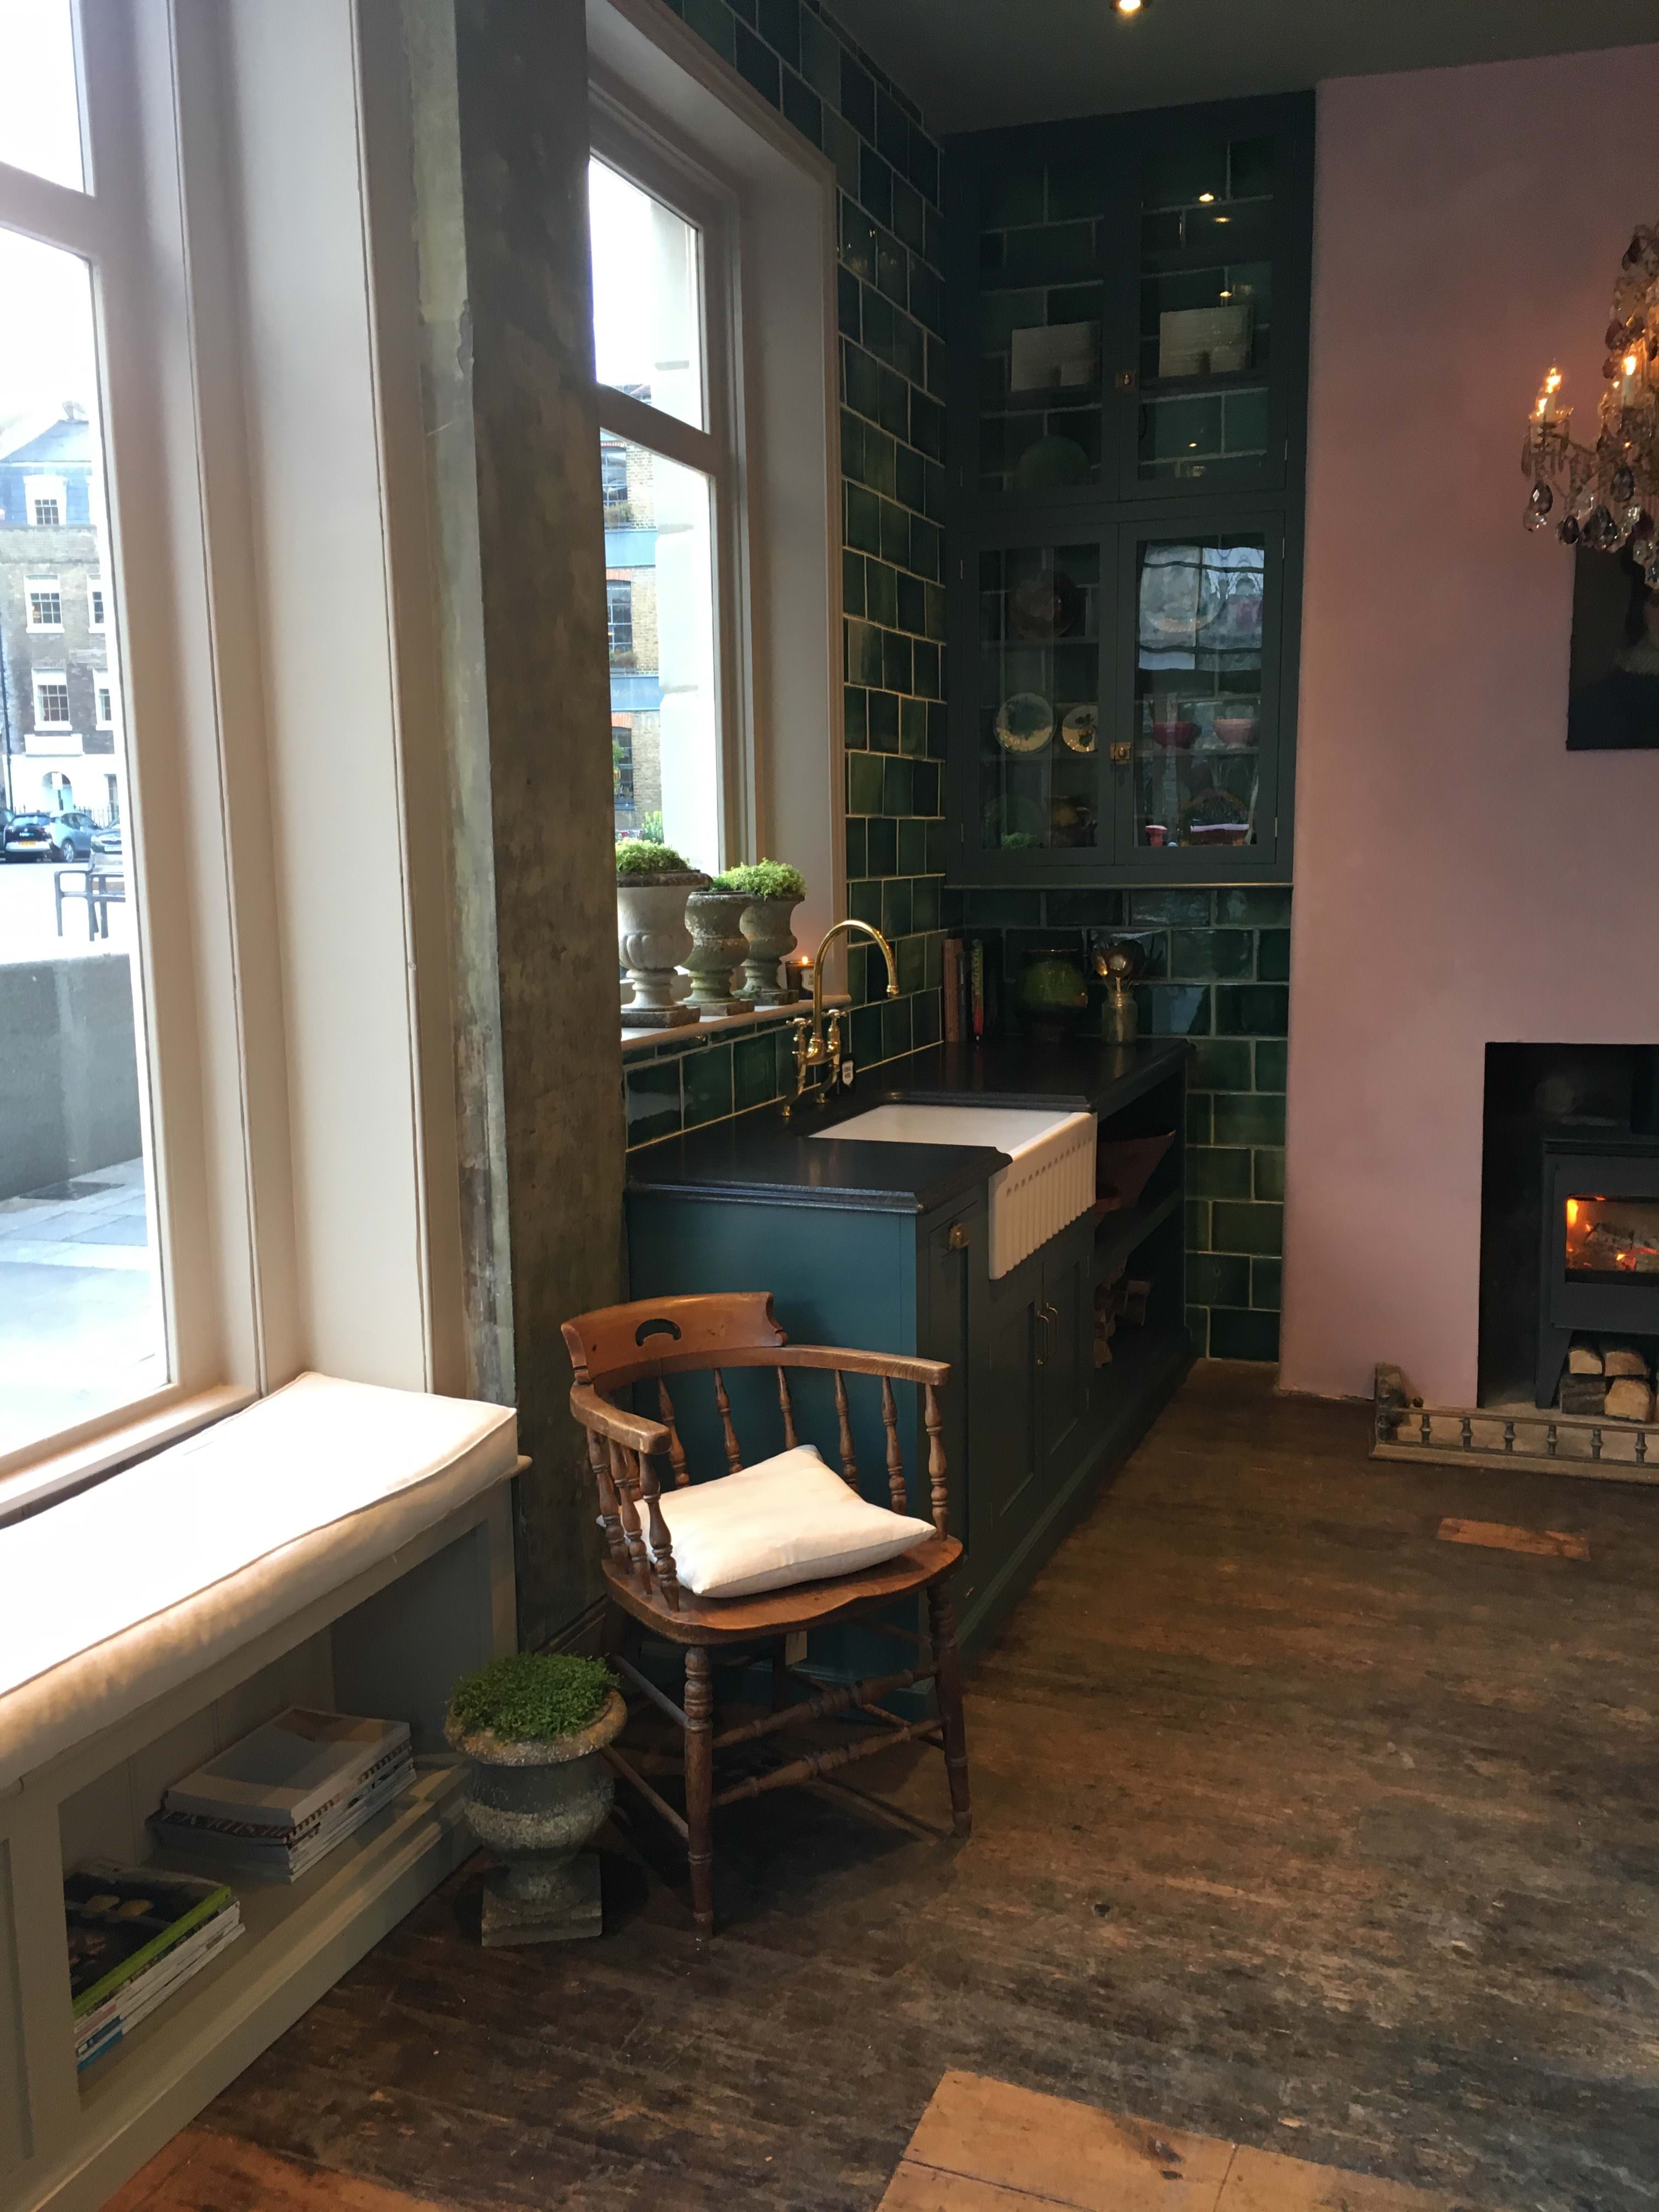 A window seat, a spot to sit, a wood burner and a special view onto St Johns Square